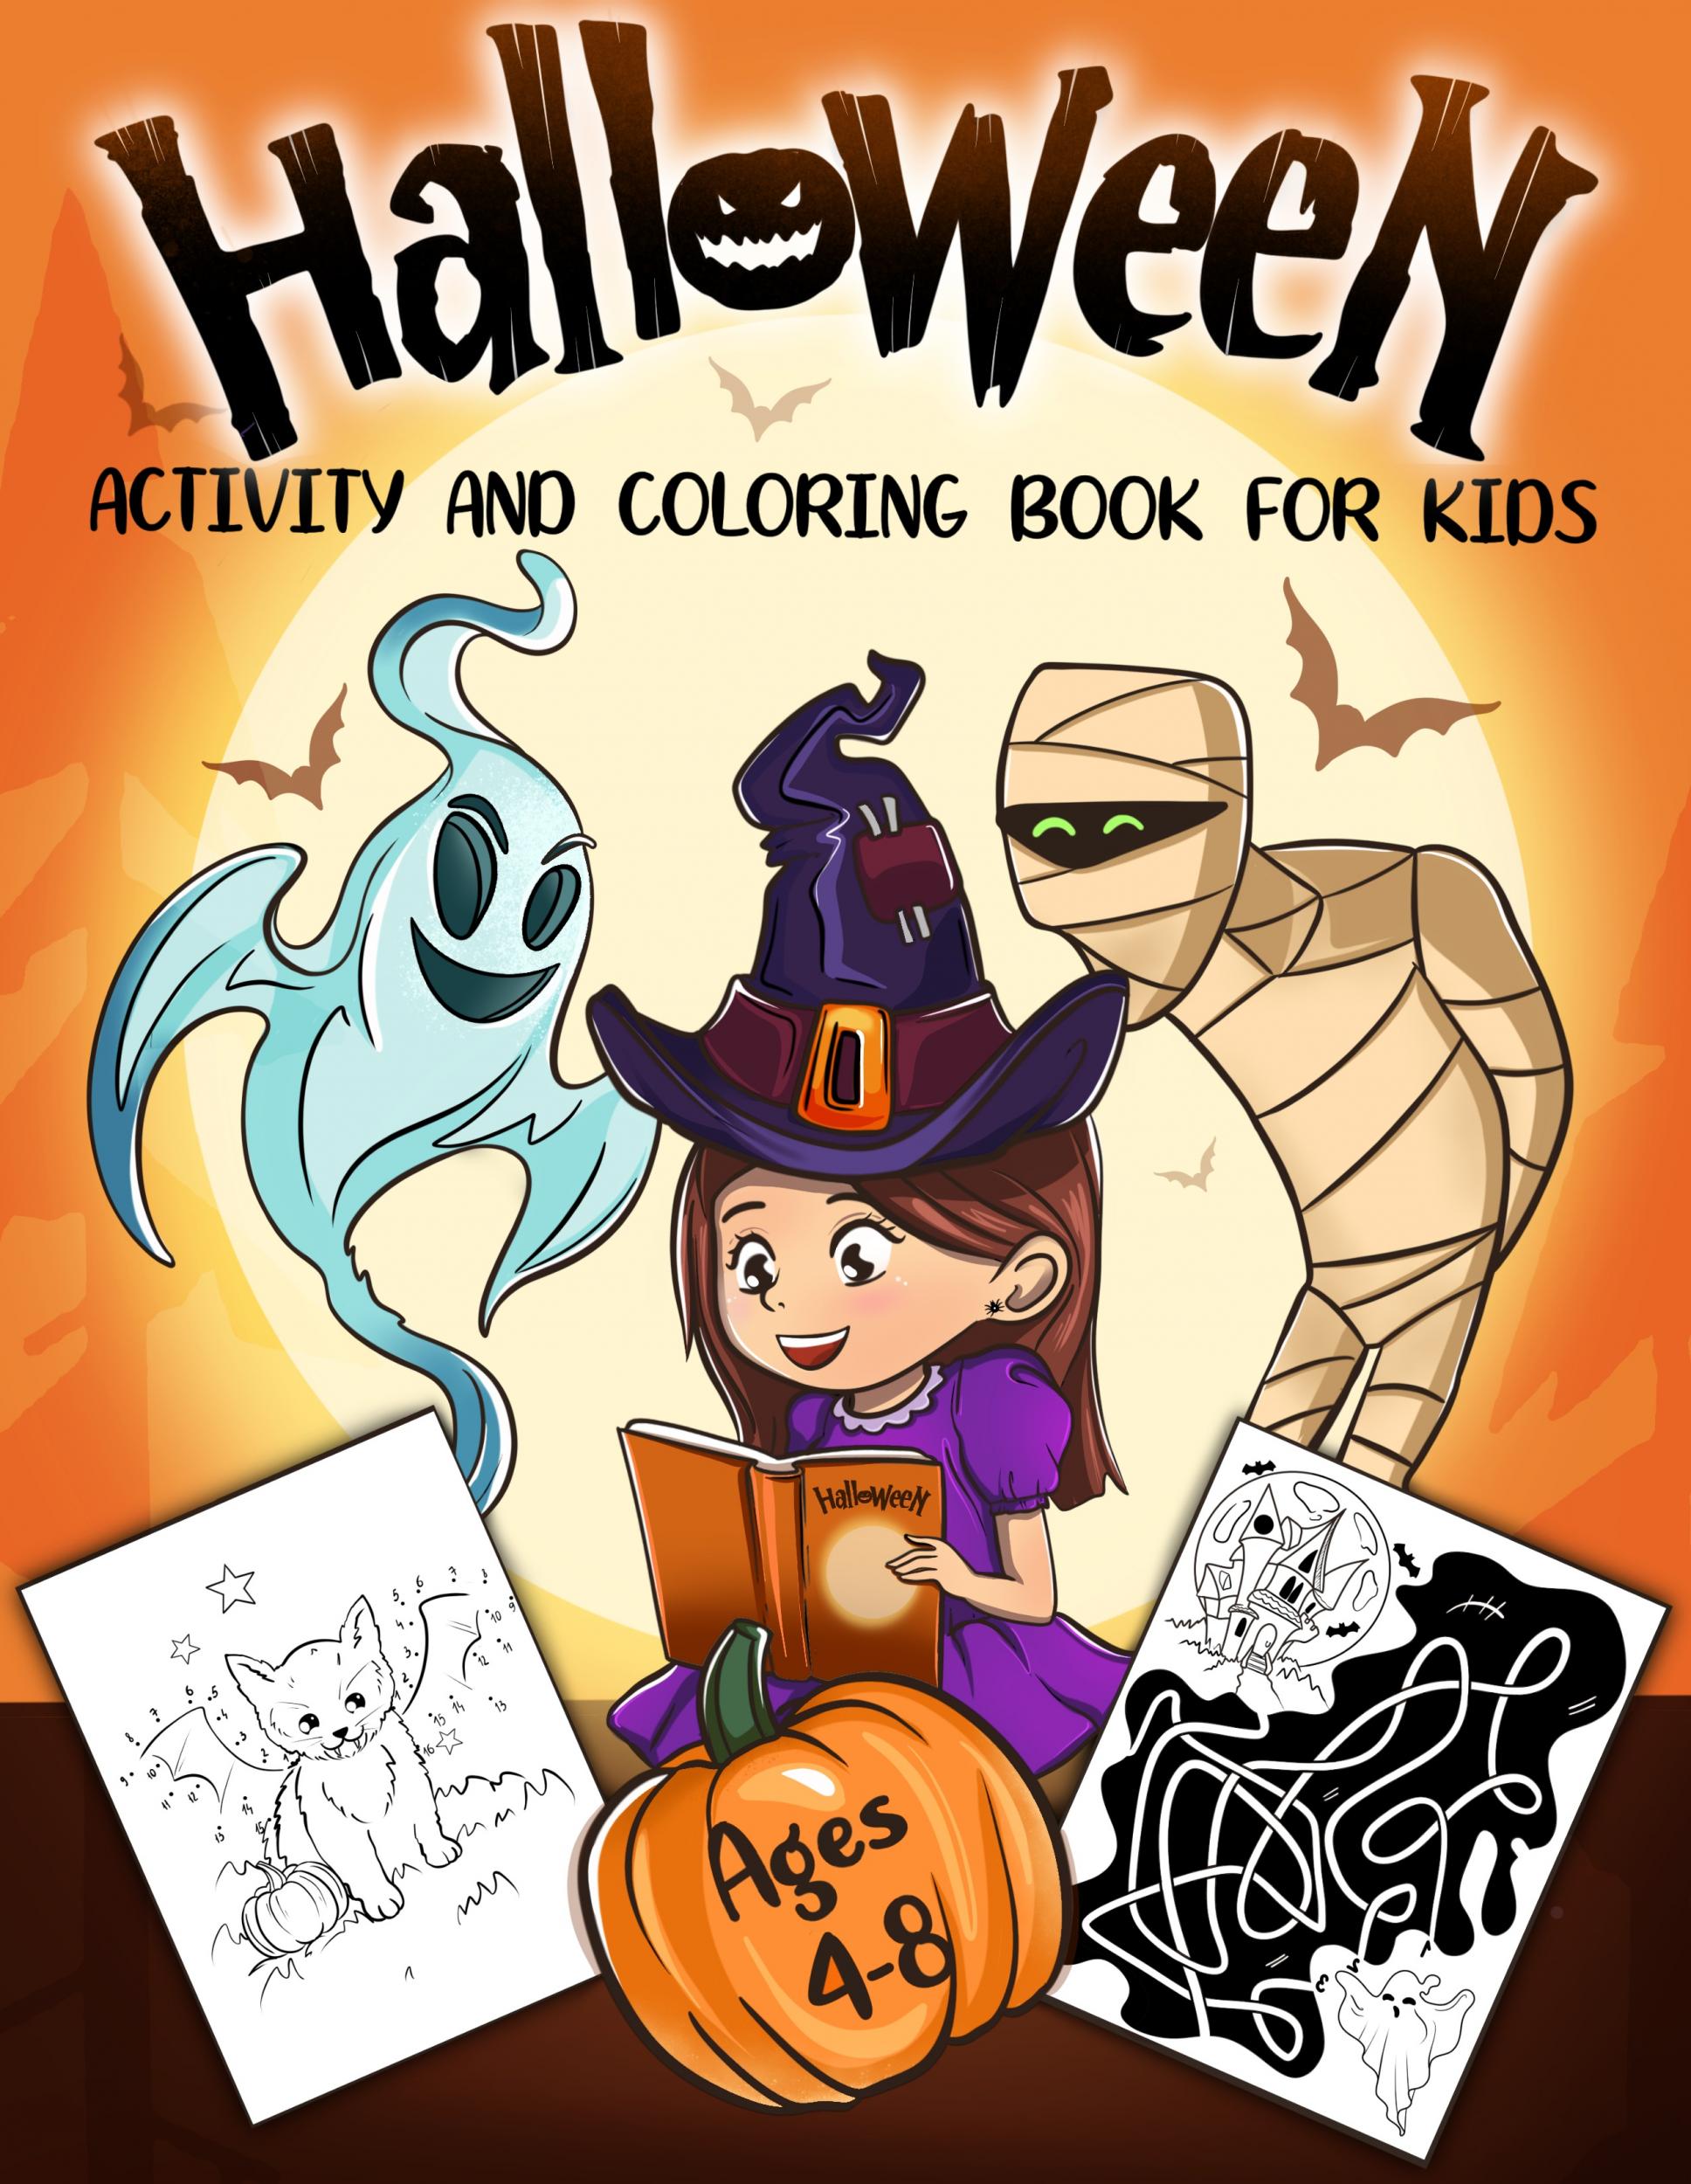 Get your free copy of Halloween Activity and Coloring Book for Kids